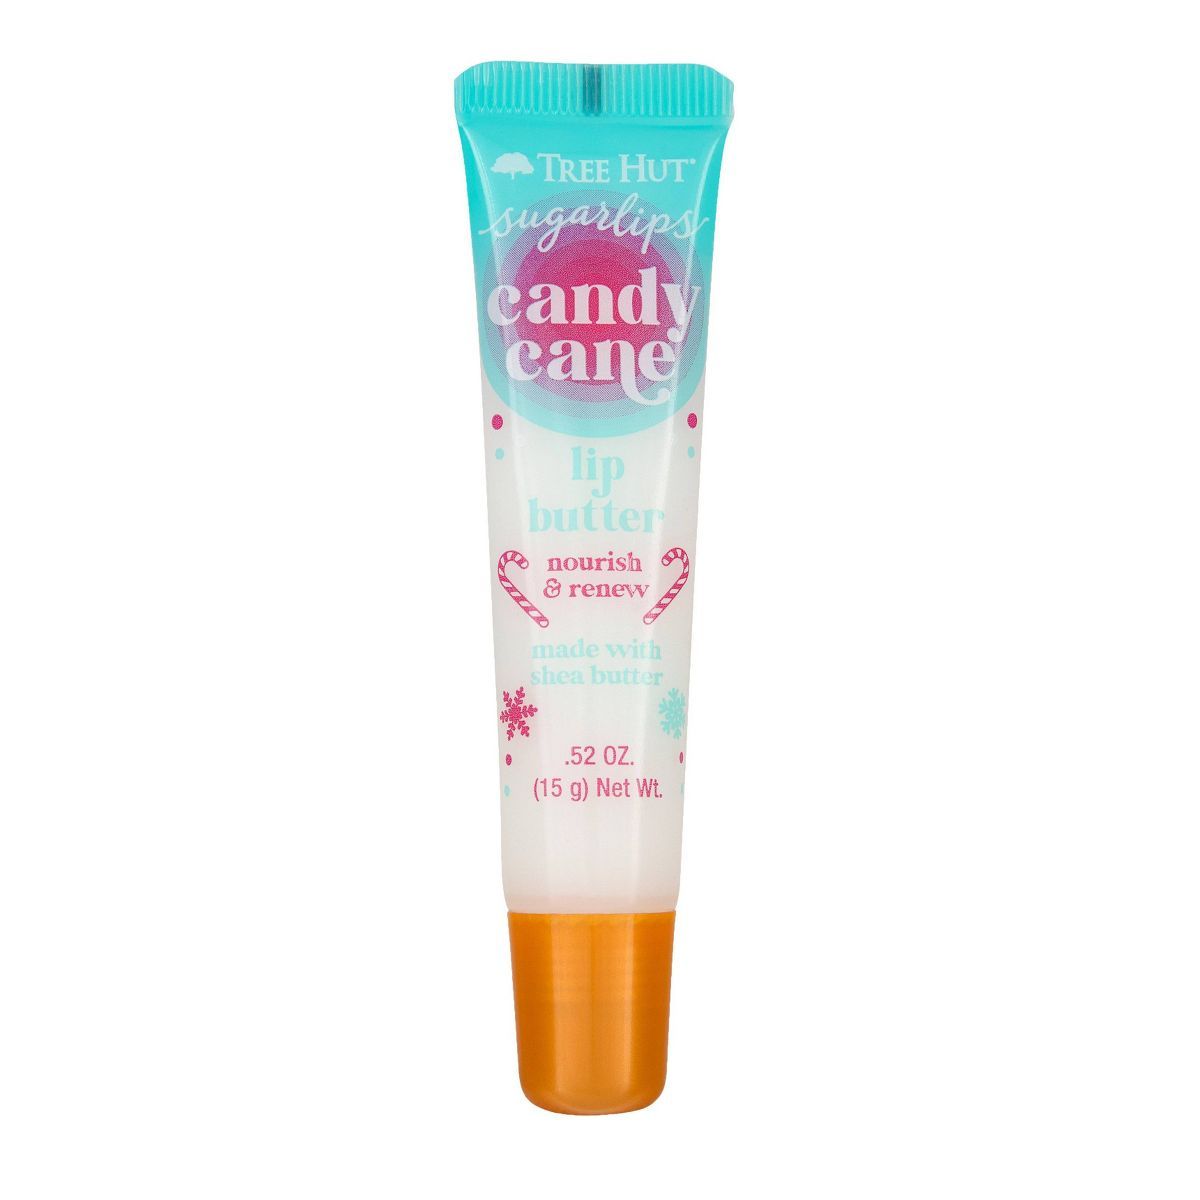 Tree Hut Candy Cane Sugarlips Lip Butter - 0.52oz | Target